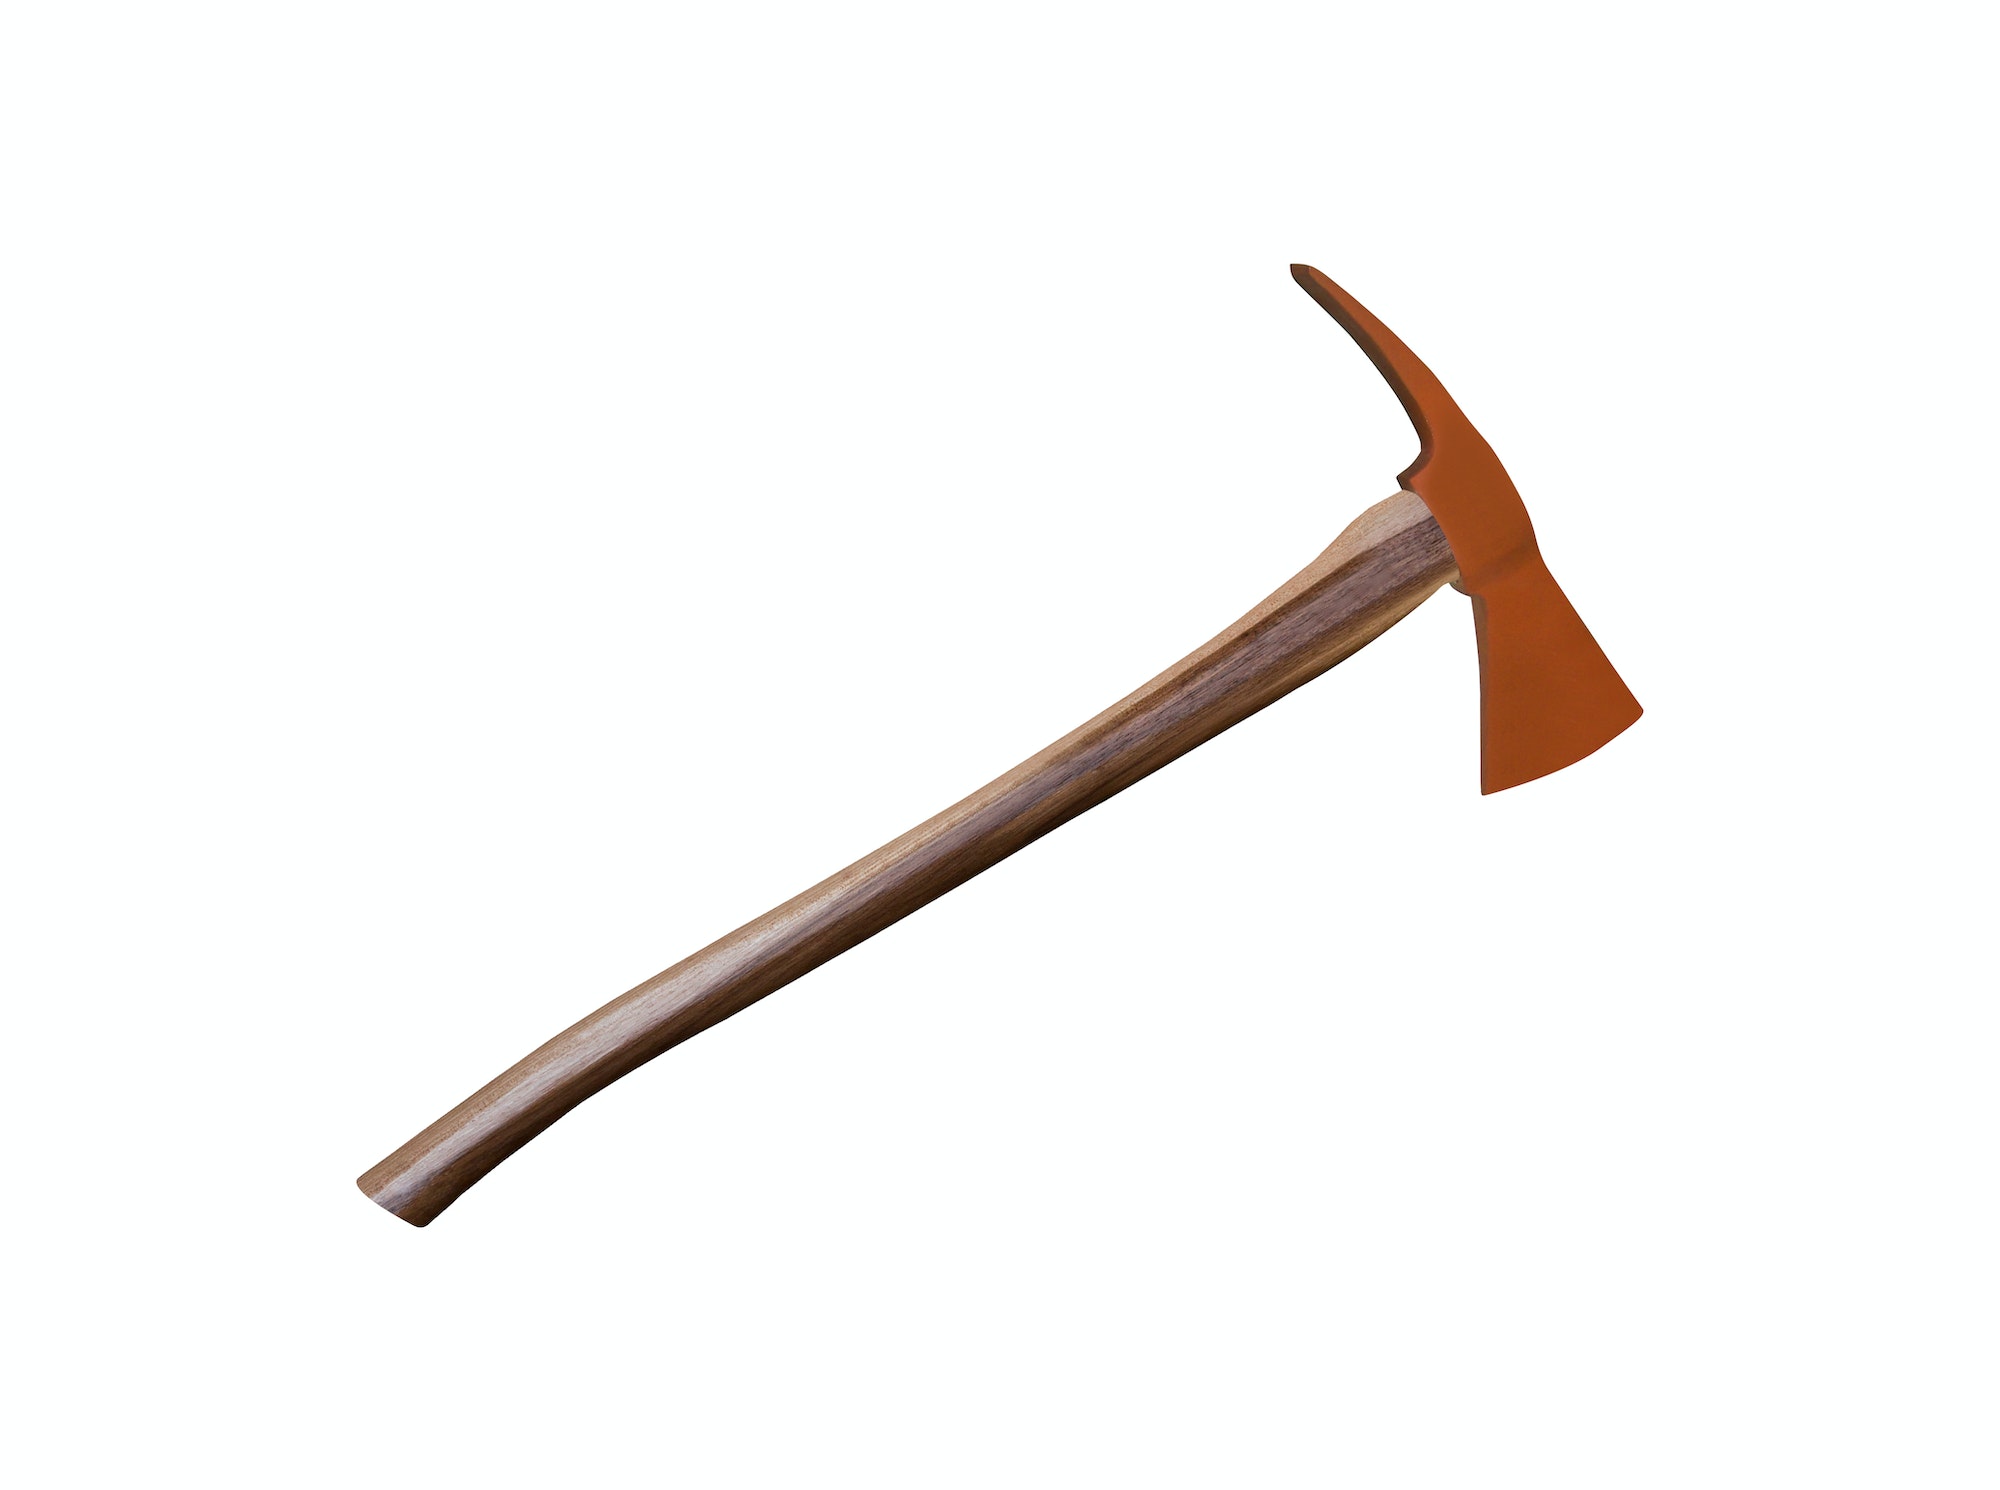 Fire Axe on the white background